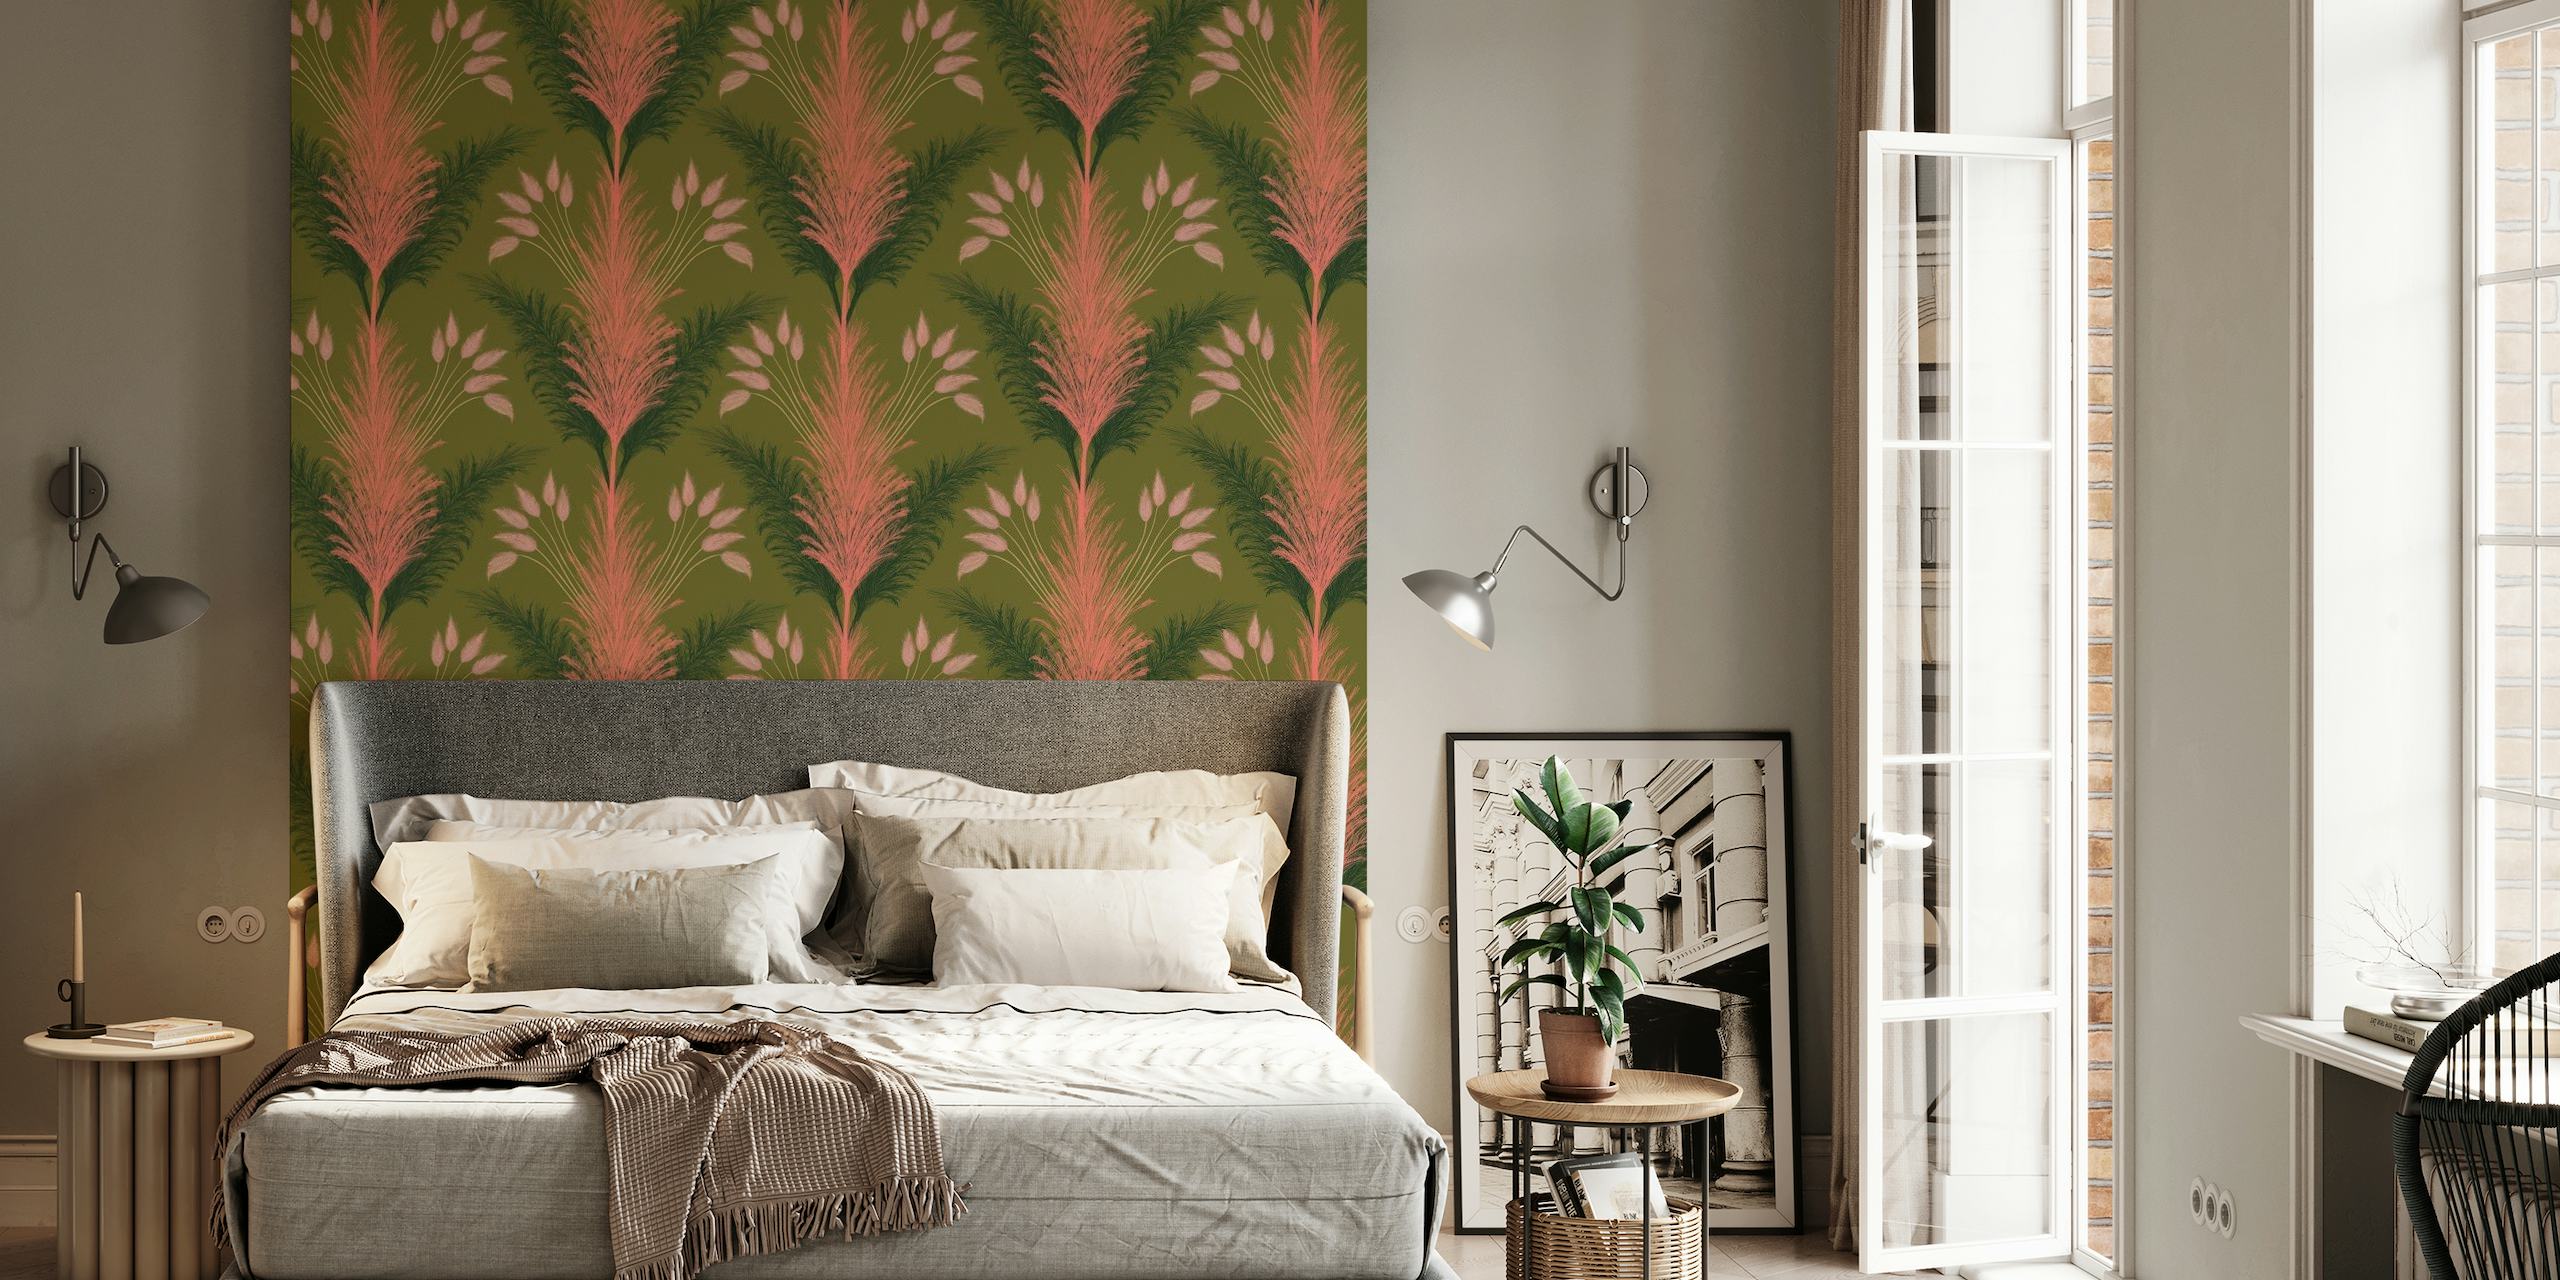 Soothing Pampas Grass mural wallpaper in an inviting room